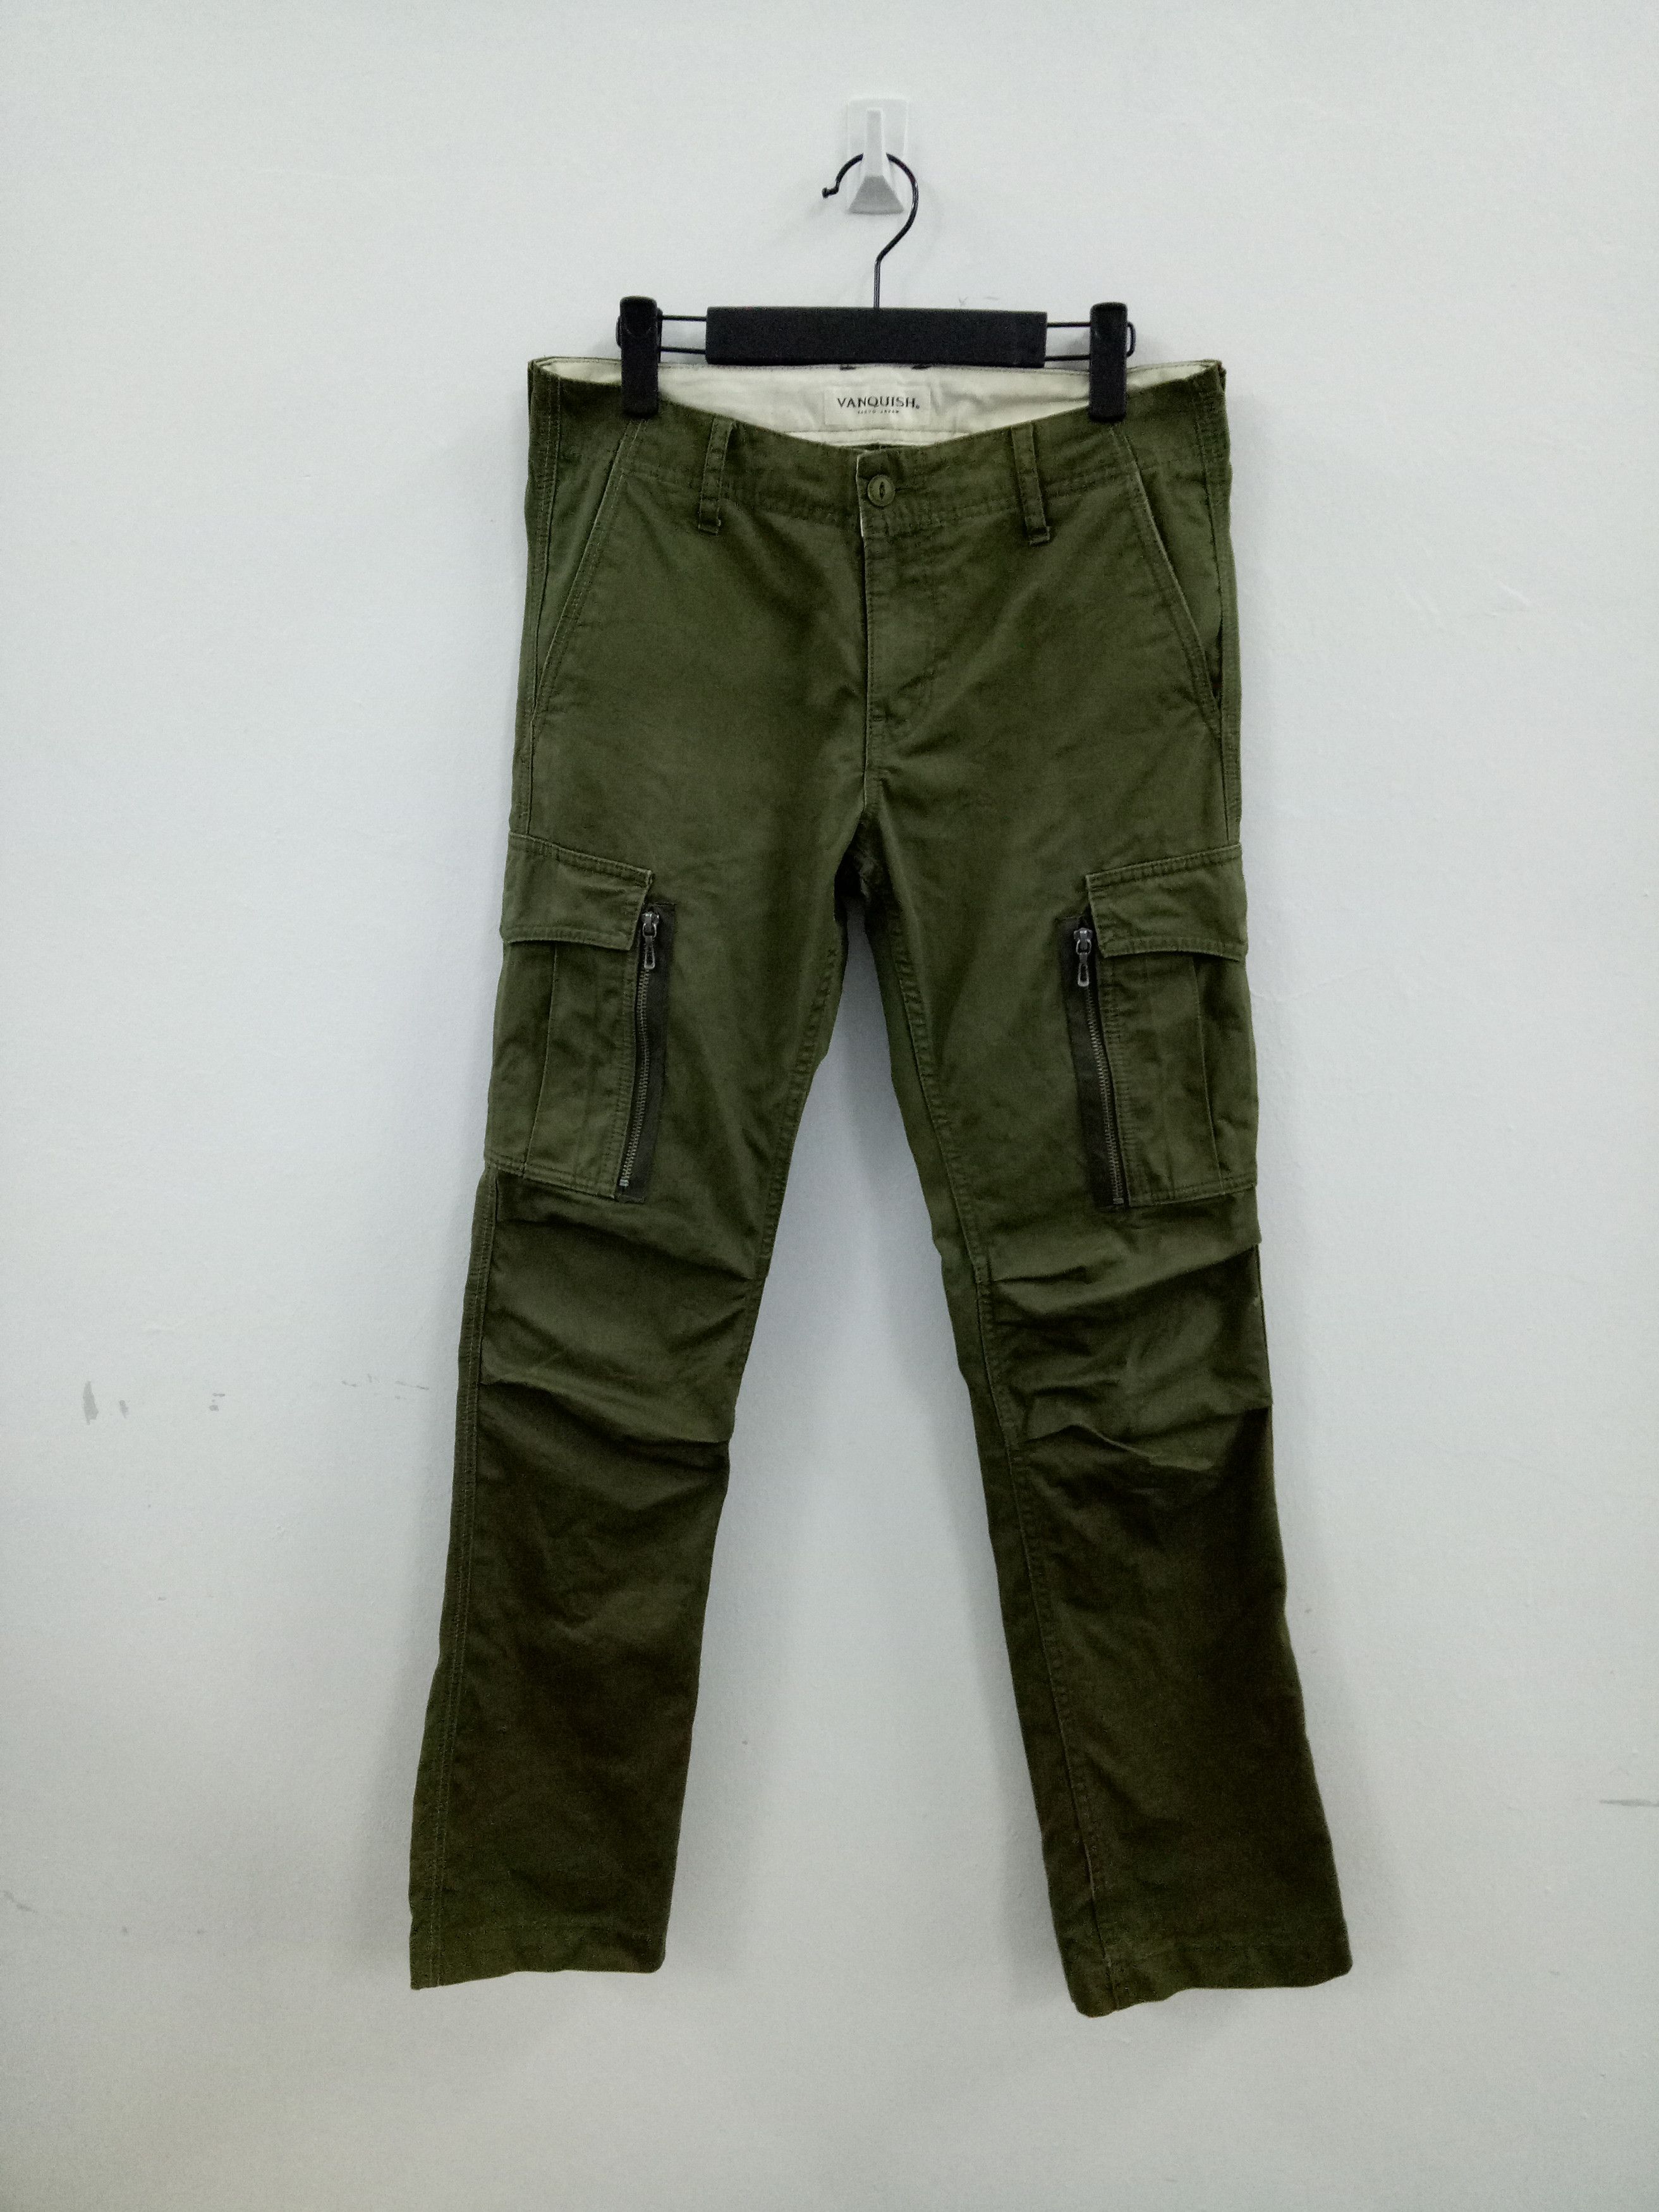 Vanquish Low Rise Cargo Pants Slim Fit Green Army | Grailed